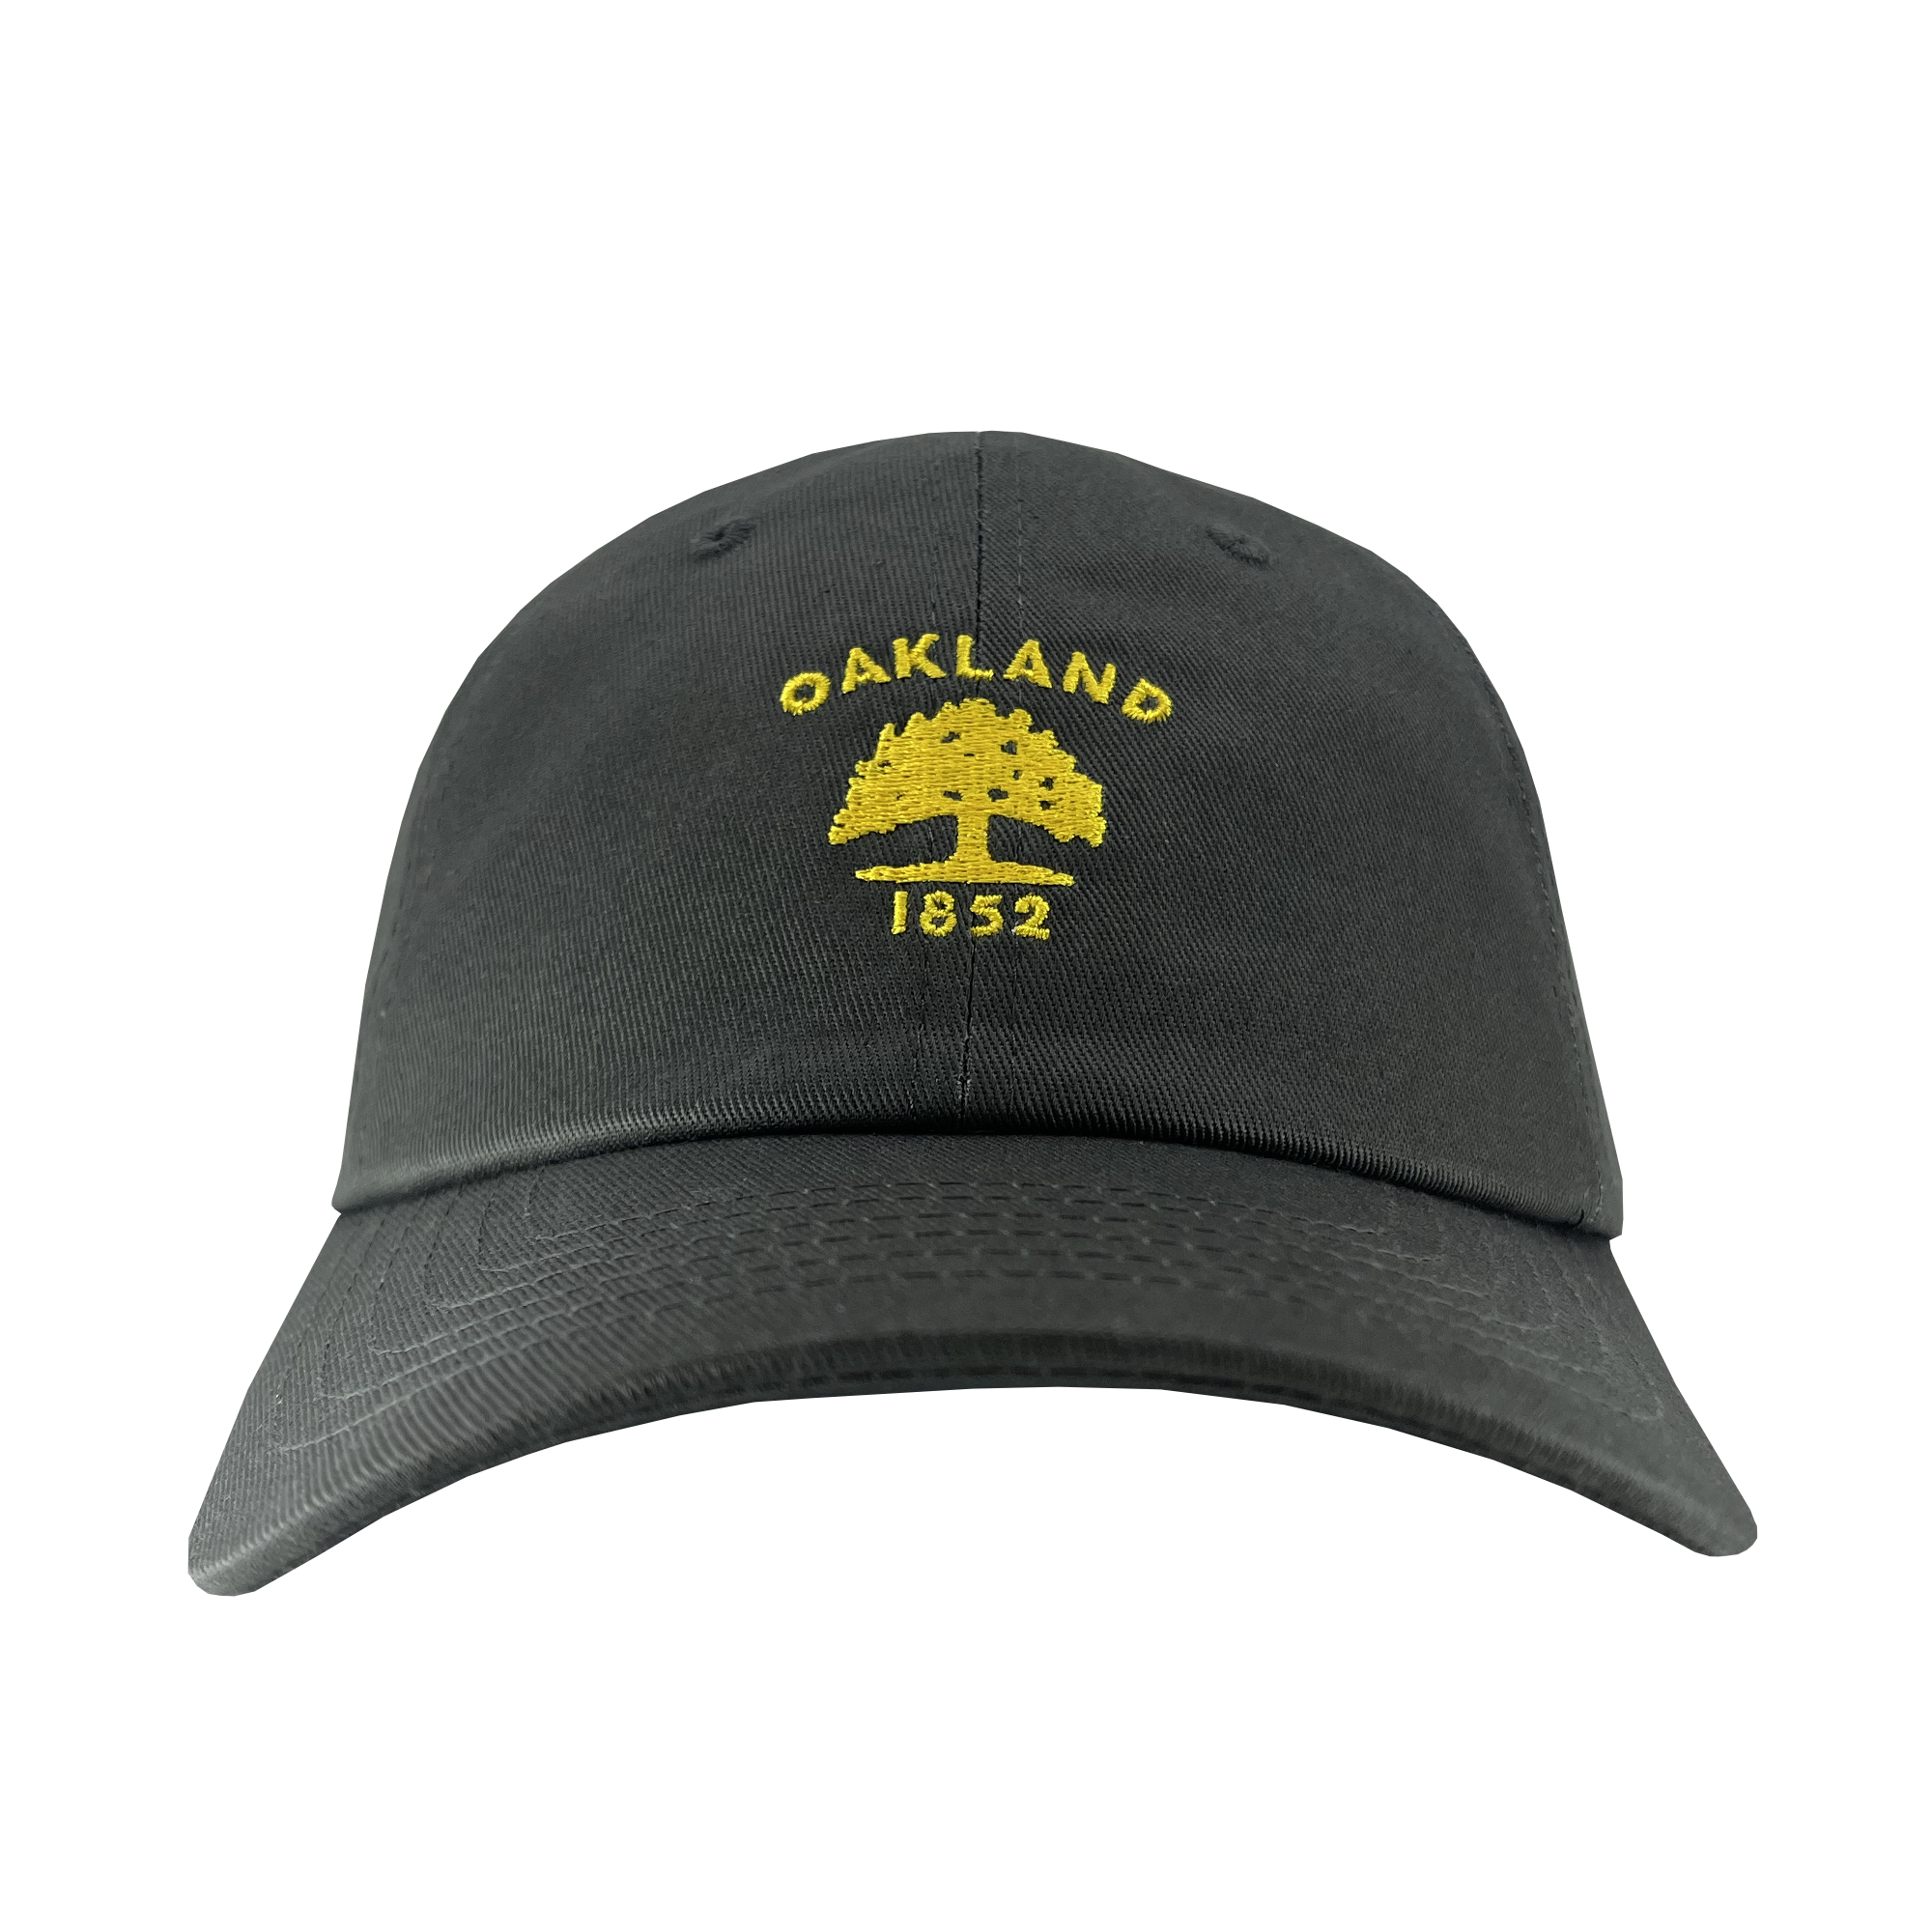 Front view of dark grey cotton dad hat with yellow embroidered Oakland Flag 1832 logo on the crown. 